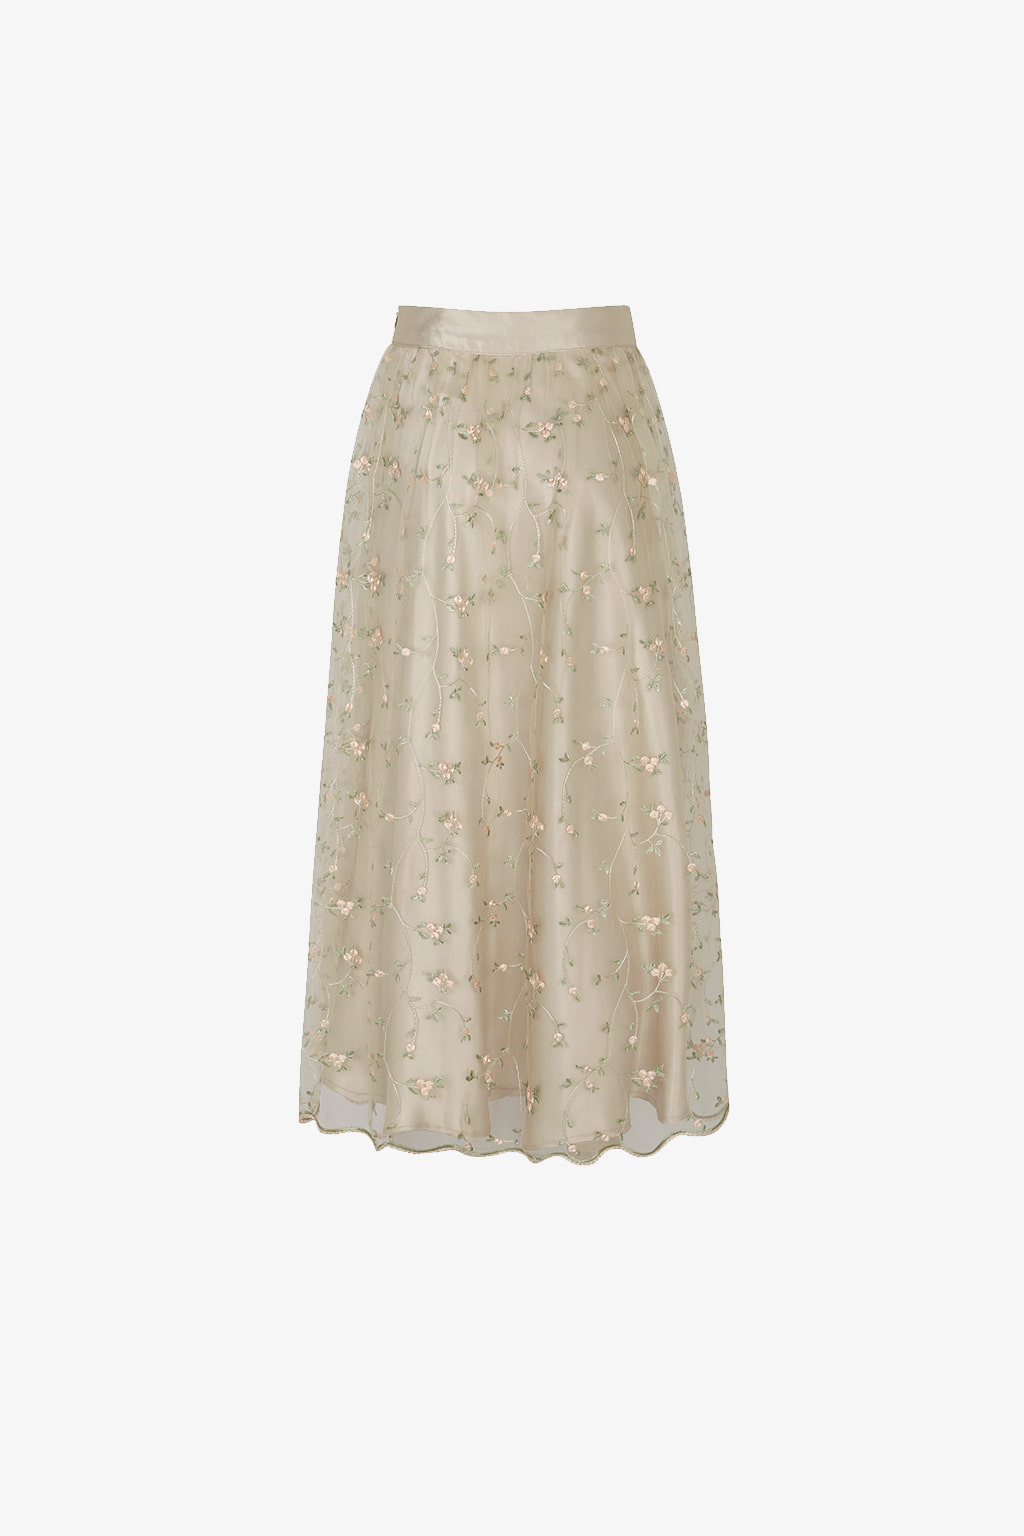 [ASTIER] blooming lace skirt